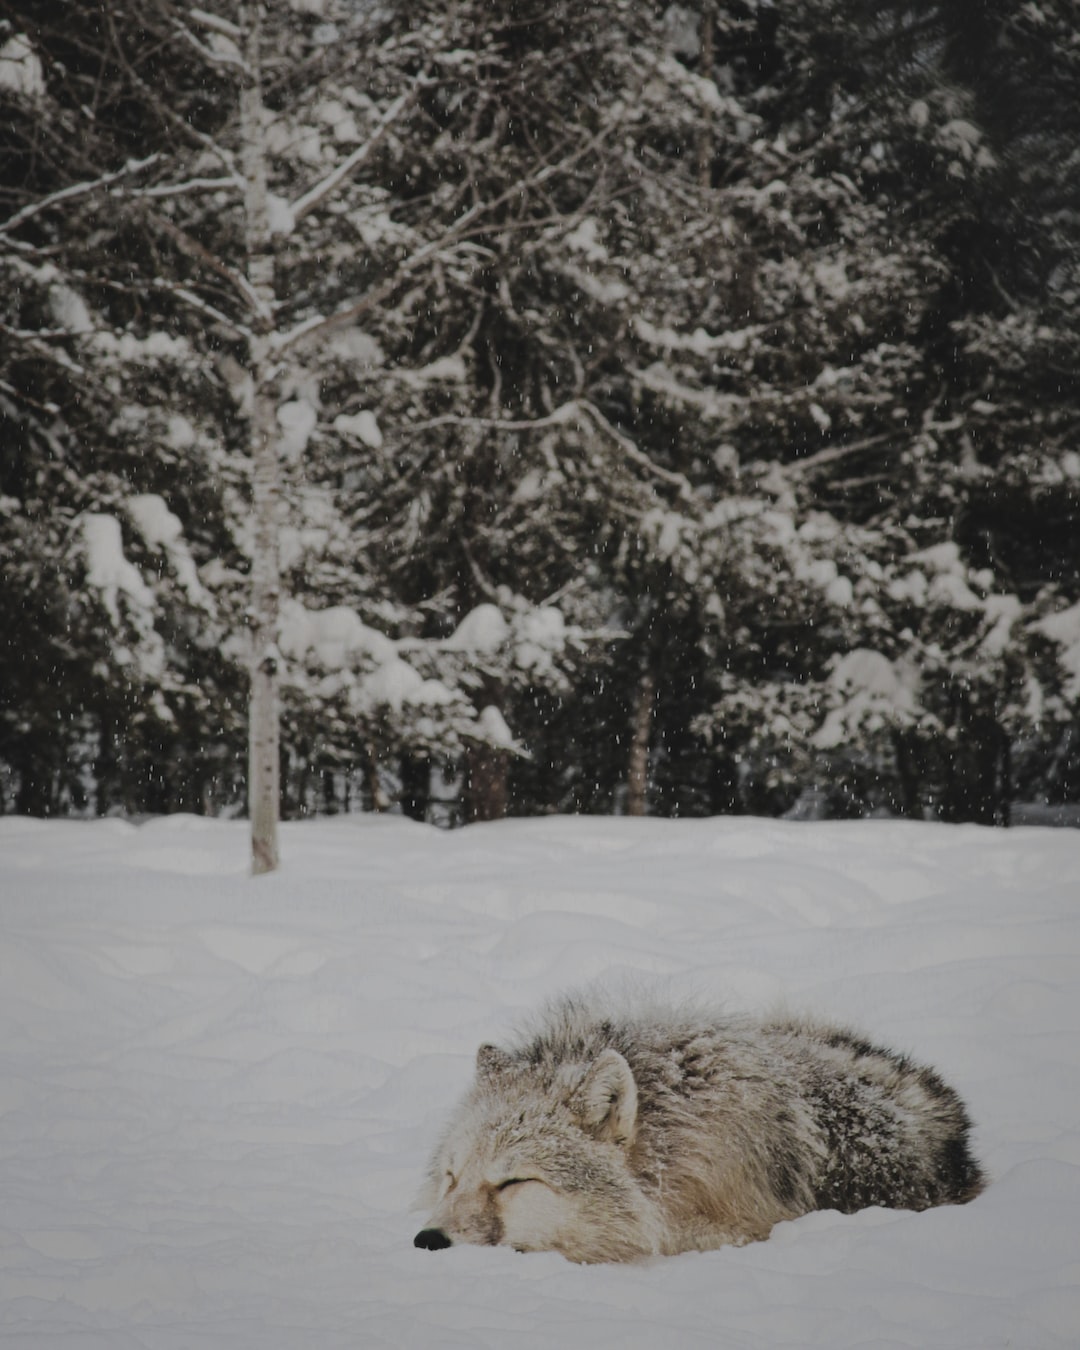 Naptime for this wolf